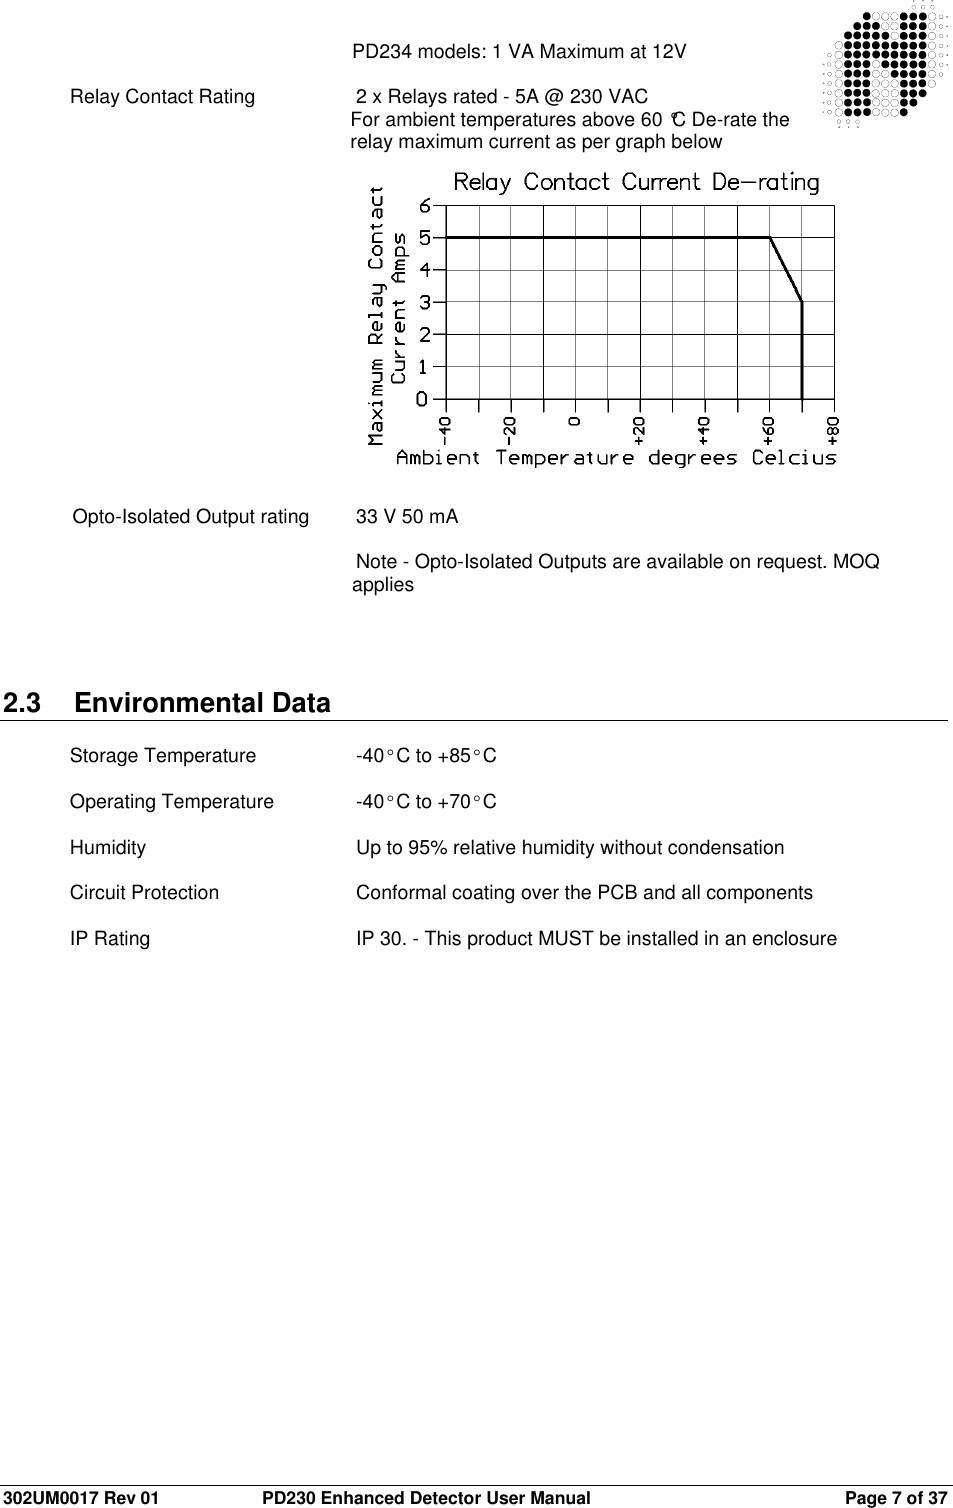  302UM0017 Rev 01  PD230 Enhanced Detector User Manual   Page 7 of 37 PD234 models: 1 VA Maximum at 12V  Relay Contact Rating    2 x Relays rated - 5A @ 230 VAC For ambient temperatures above 60 °C De-rate the relay maximum current as per graph below                 Opto-Isolated Output rating  33 V 50 mA  Note - Opto-Isolated Outputs are available on request. MOQ applies     2.3  Environmental Data  Storage Temperature    -40°C to +85°C  Operating Temperature    -40°C to +70°C  Humidity       Up to 95% relative humidity without condensation  Circuit Protection    Conformal coating over the PCB and all components  IP Rating      IP 30. - This product MUST be installed in an enclosure   